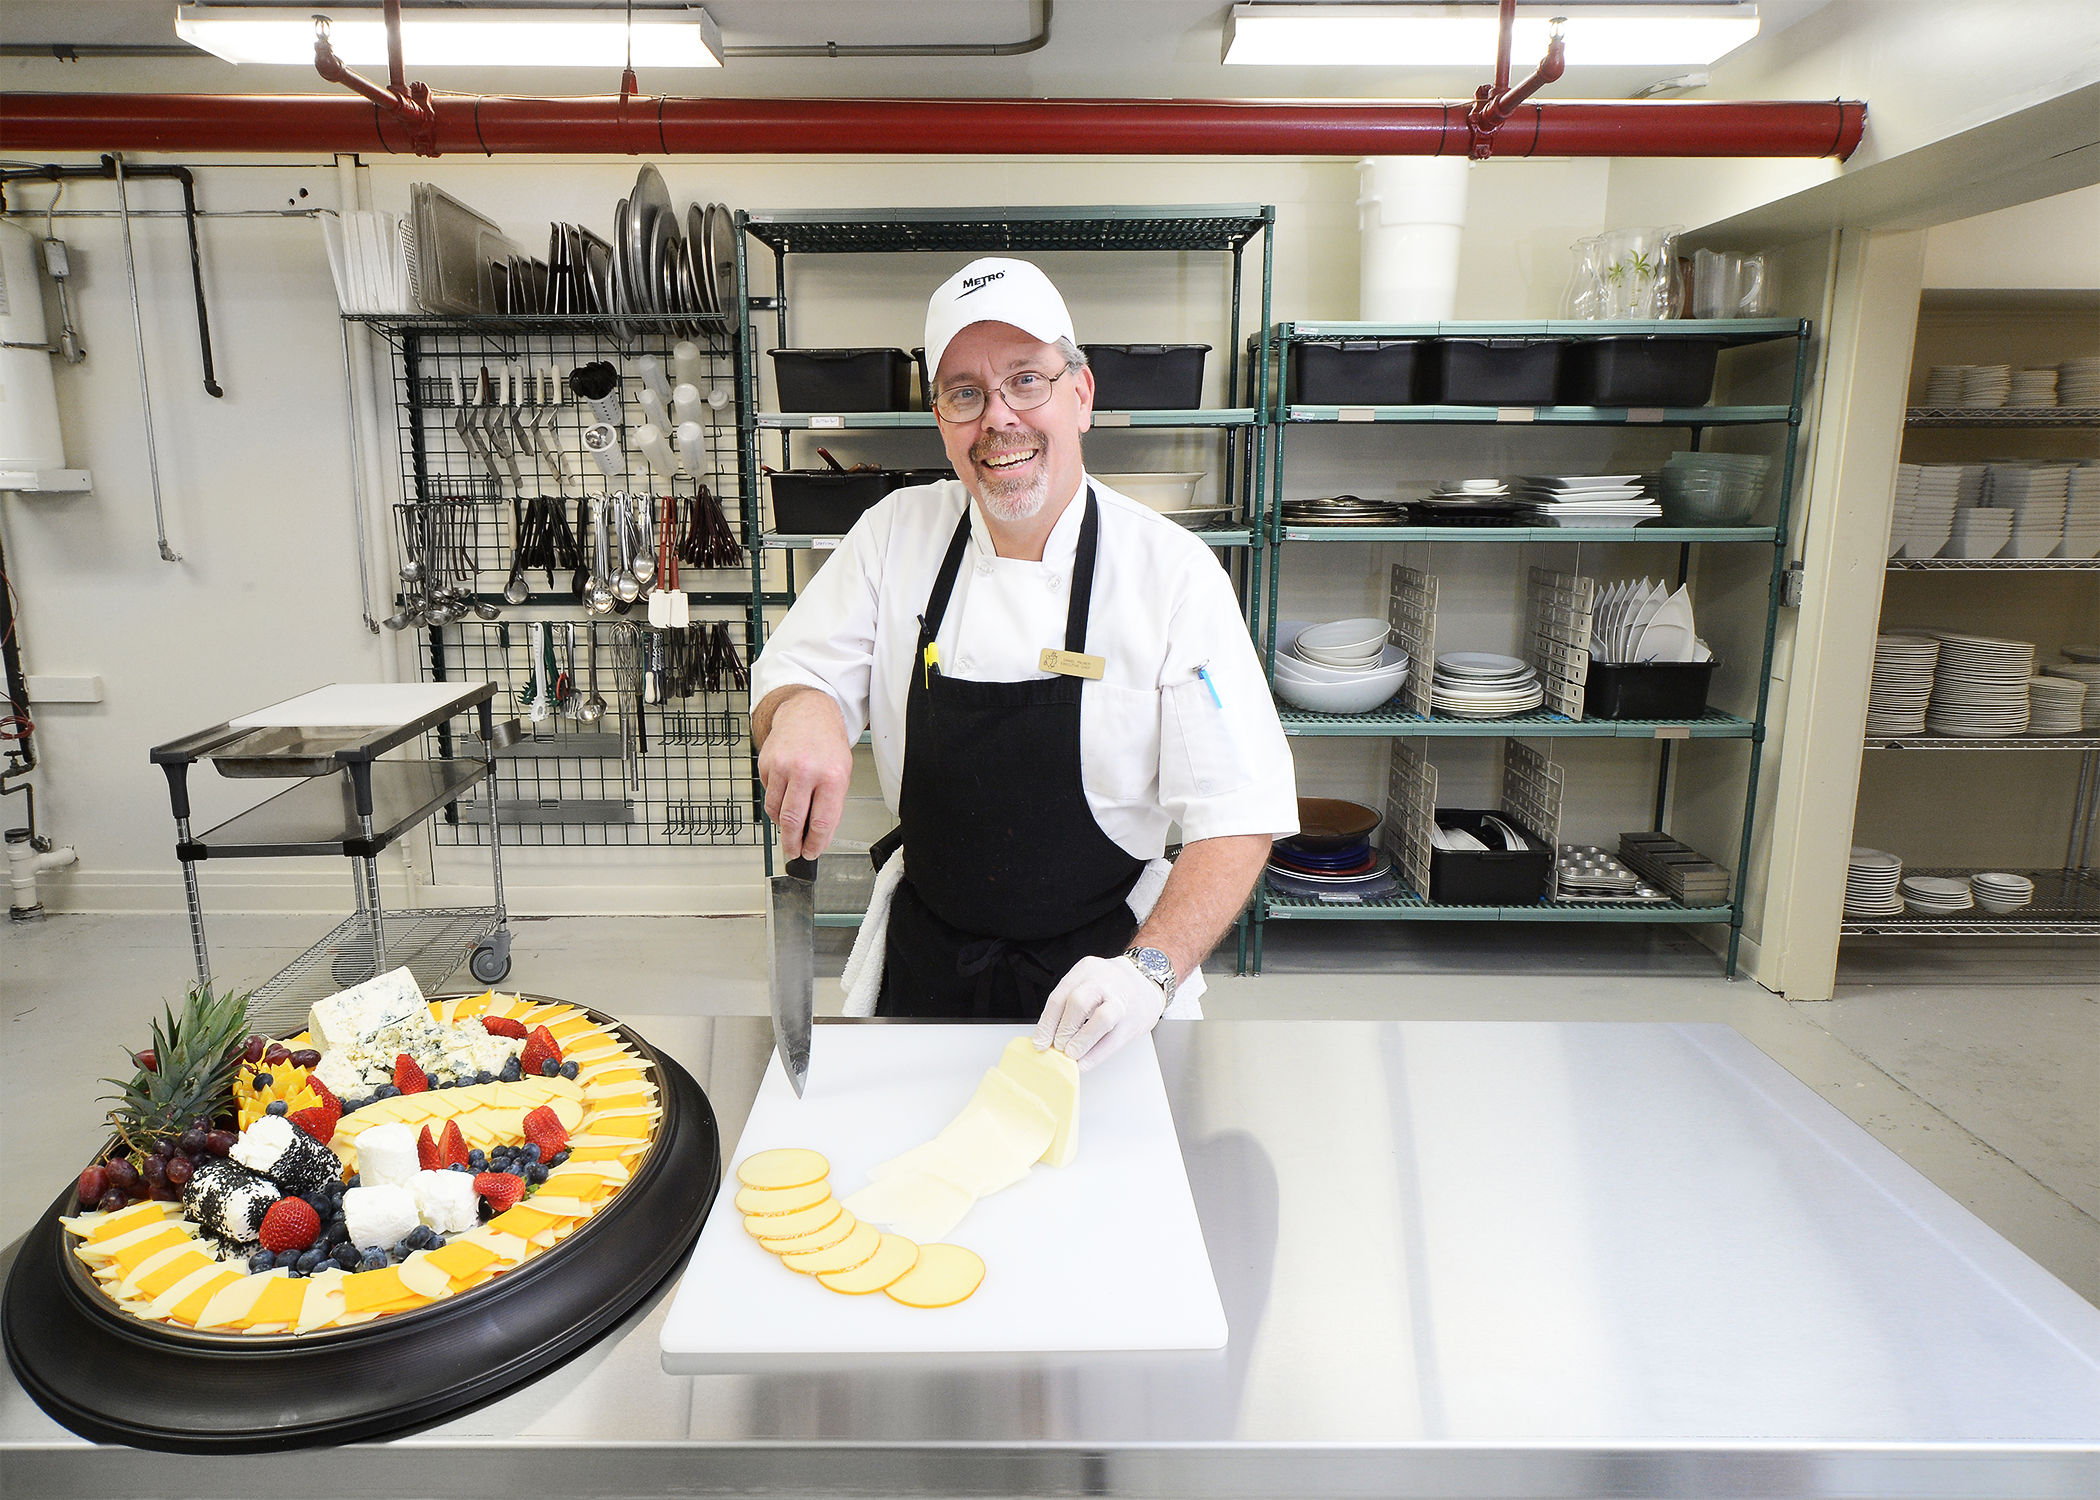 A knife wielding man wearing an apron smiles towards us while standing behind a table holding a party tray and cutting tray of cheese.